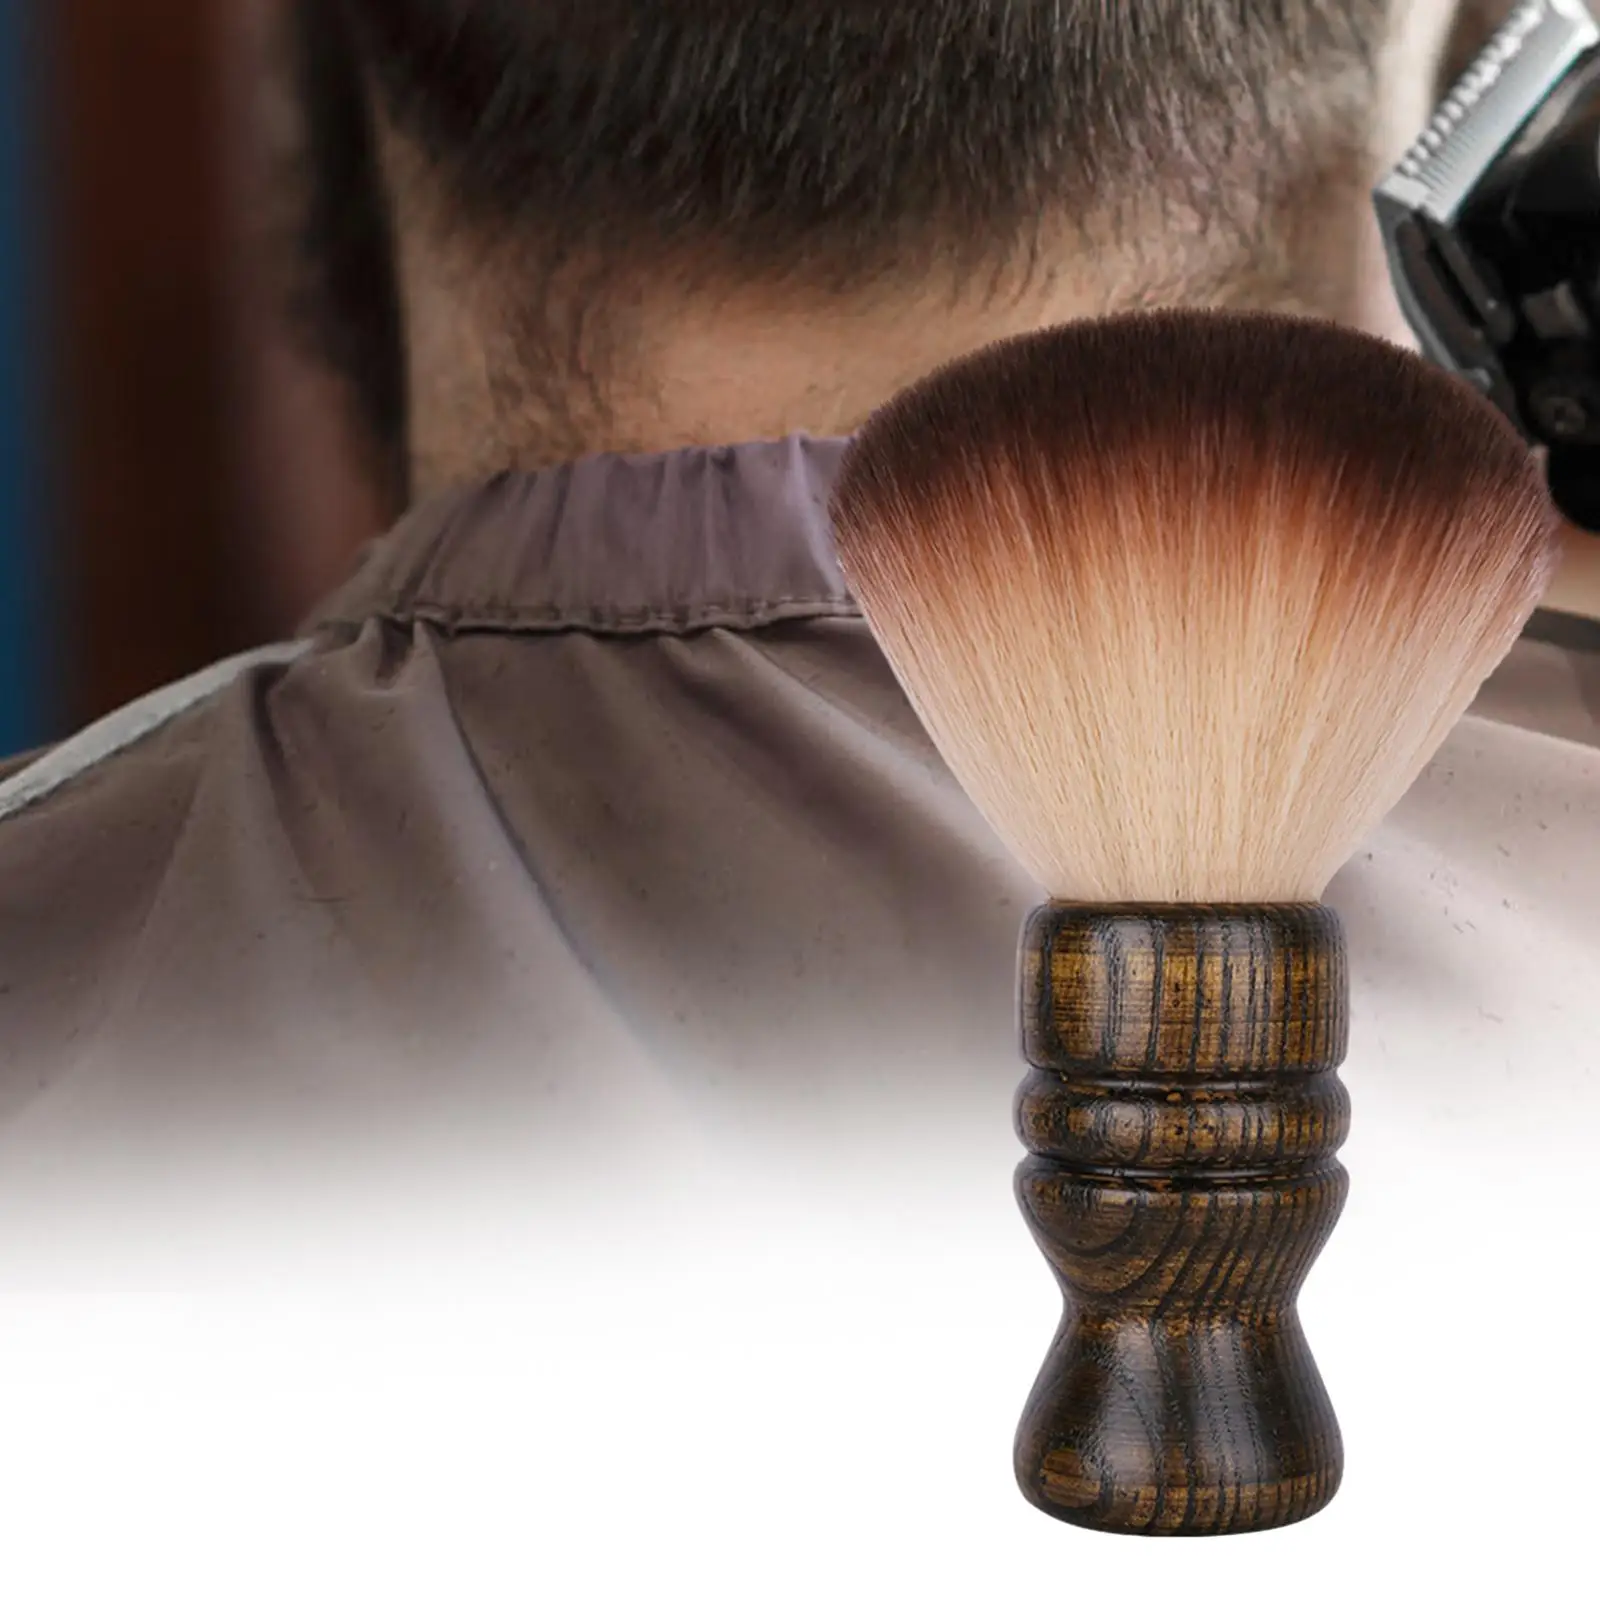 Haircut Clearning Brush Barber Neck Face Duster Brush for Men Father`s Day Gifts Boyfriend Dad Personal and Professional Shaving